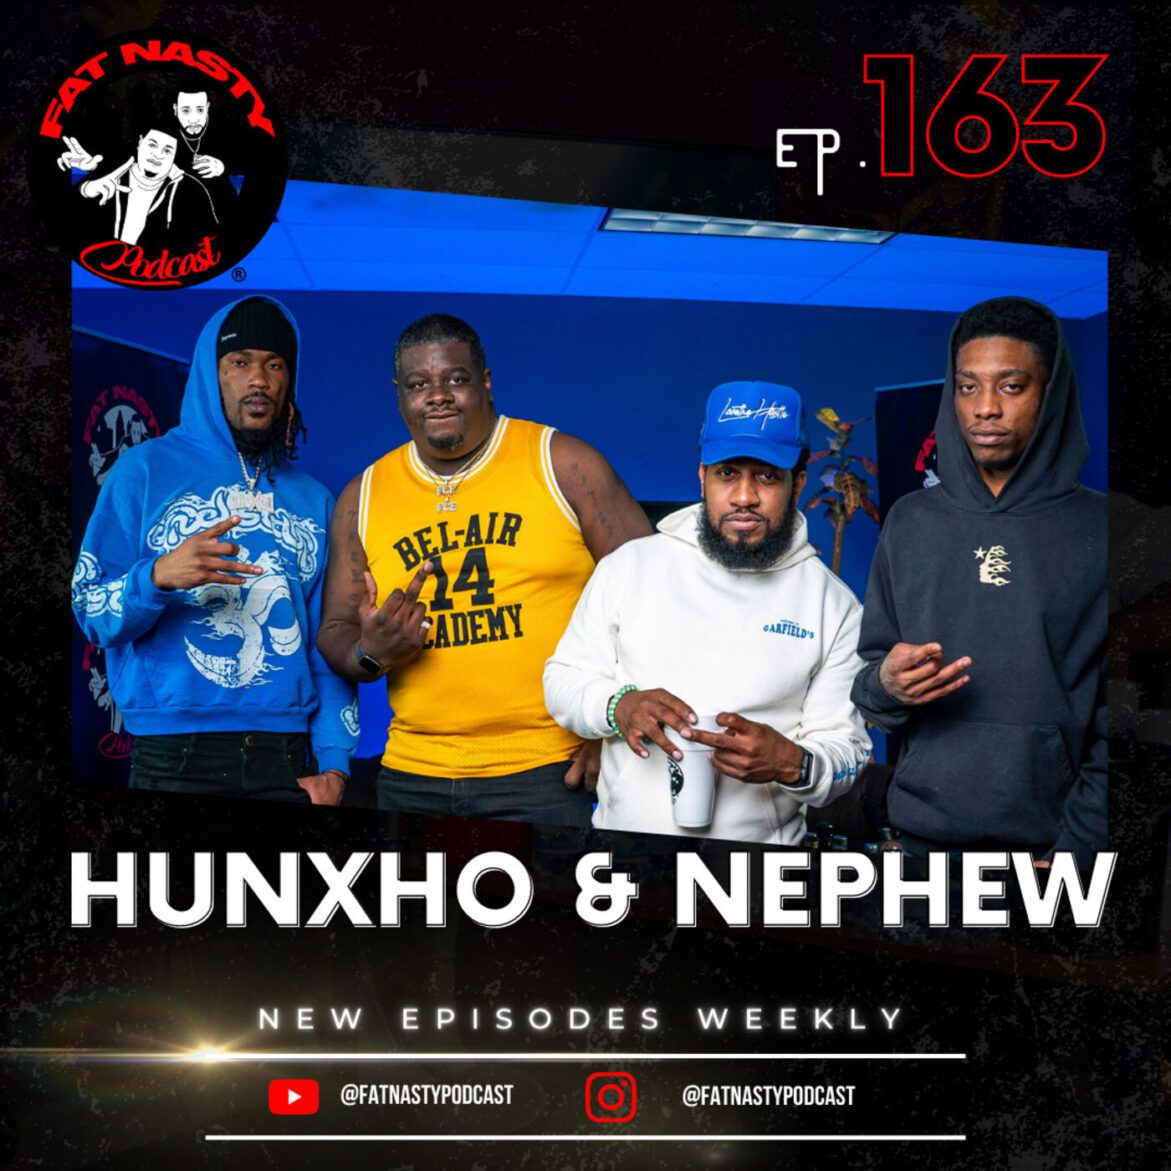 Black Podcasting - Hunxho: I Never Check In, $1 Billion is Too Much, Finding My Family In Africa, & More | Episode 163